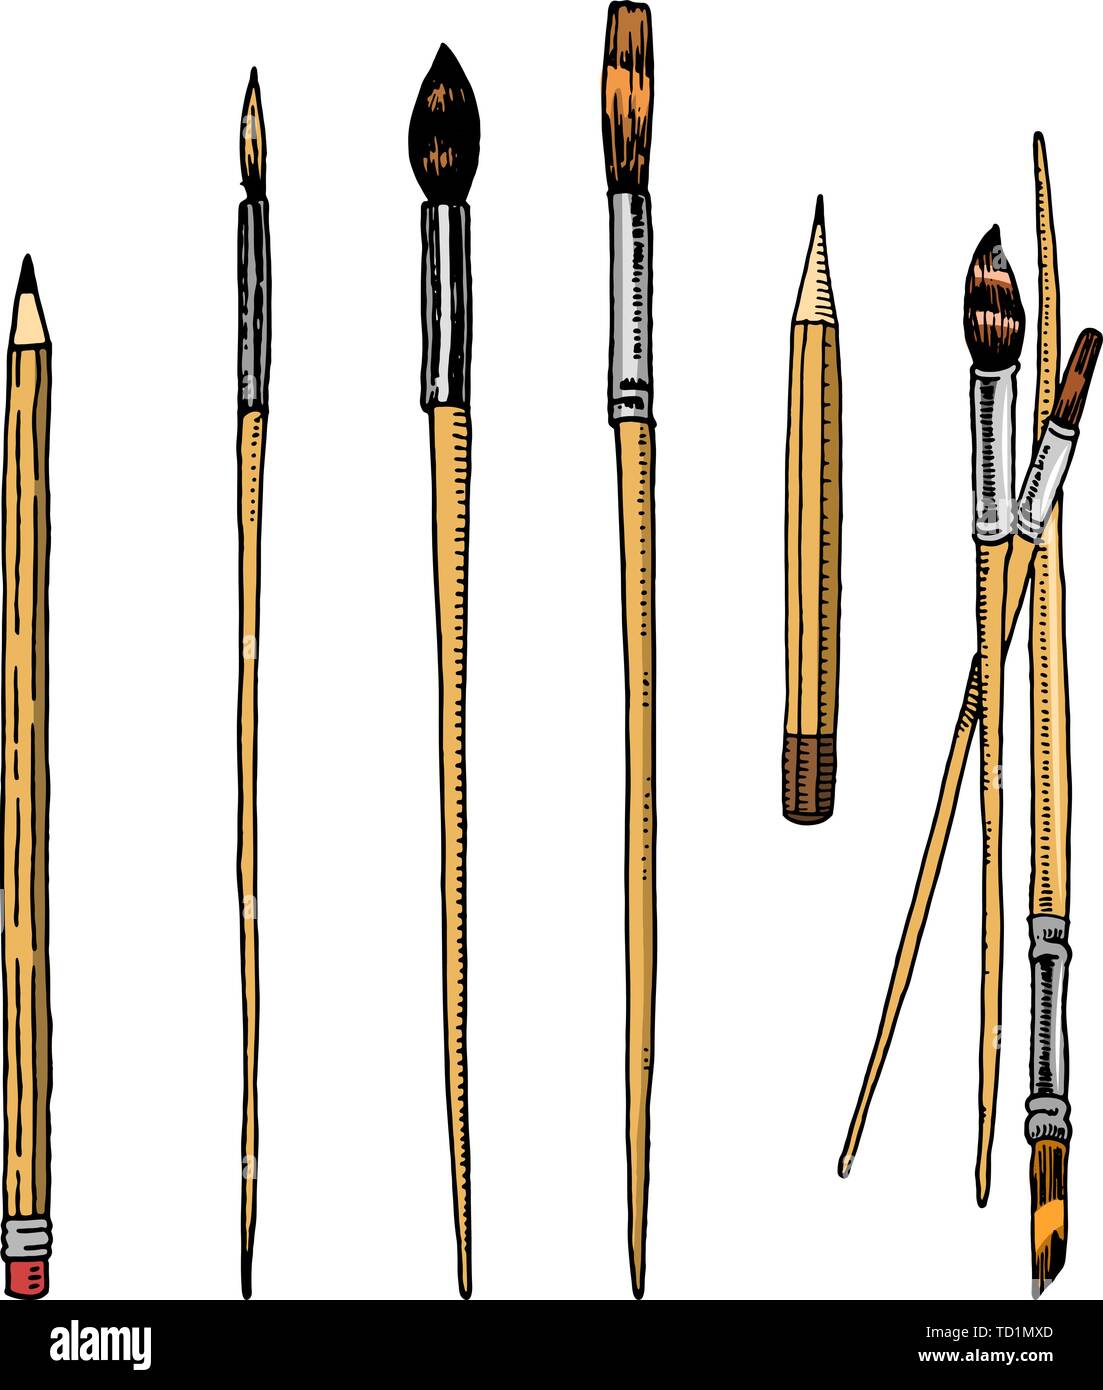 Pencil Drawing - Art Supplies & Equipment That Pencil Artists Need